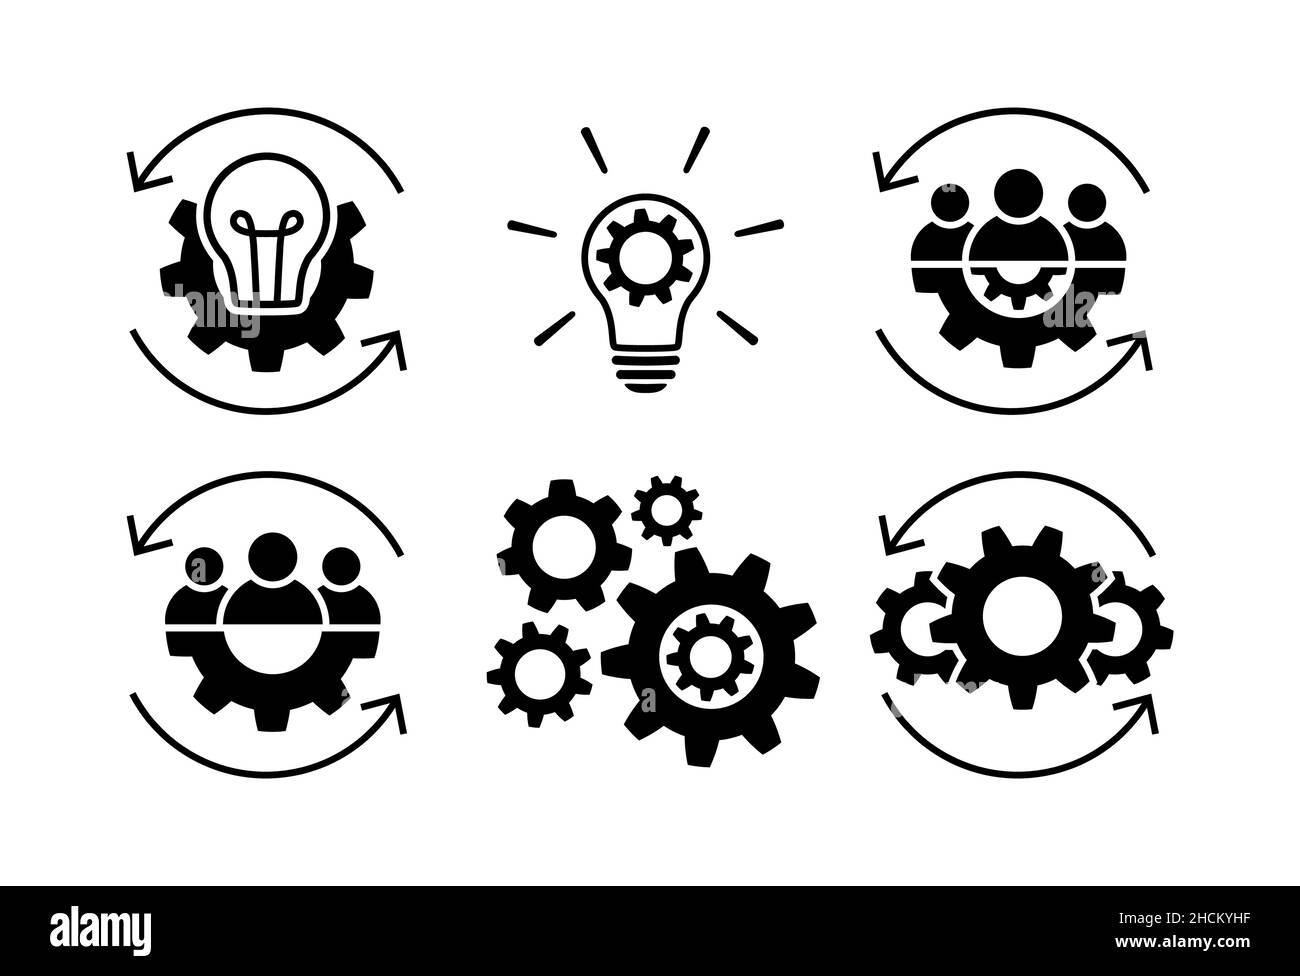 Process icons. Teamwork and creative icon set. Team and gear symbols isolated on white. Leadership signs in flat style. Group of people symbol. Teamwo Stock Vector